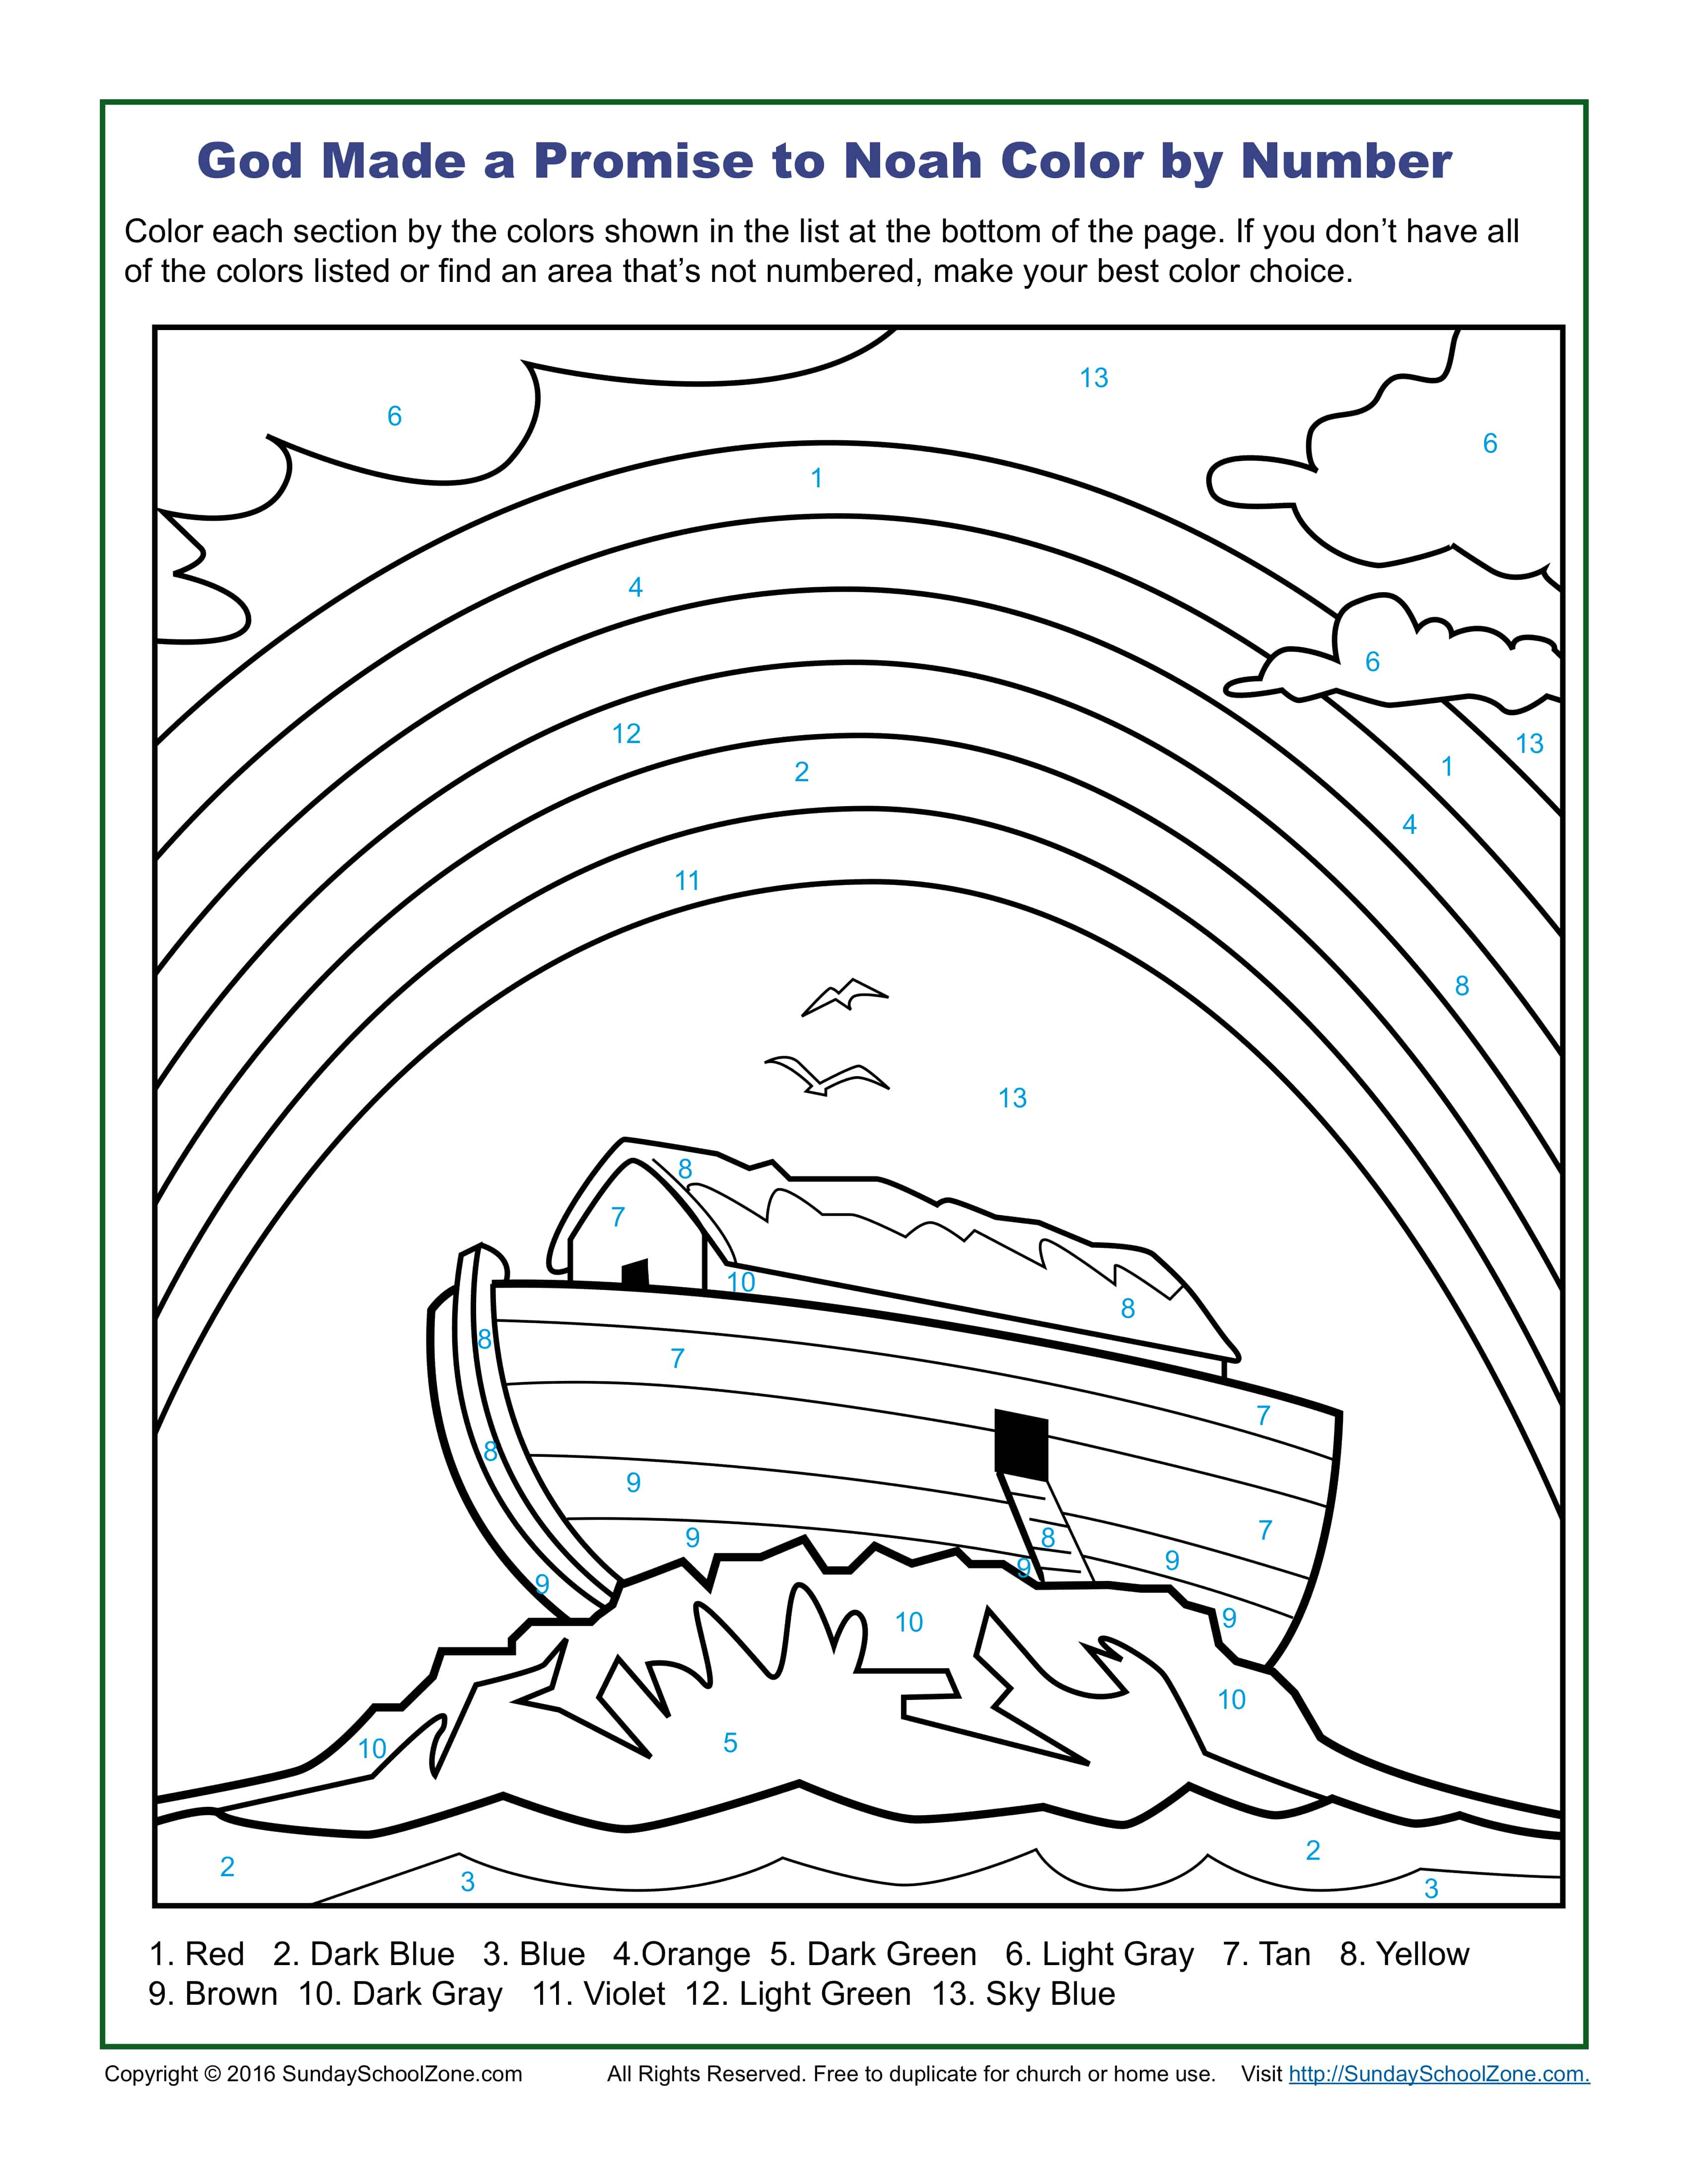 The Church Began Coloring Page Color Number Bible Coloring Pages On Sunday School Zone